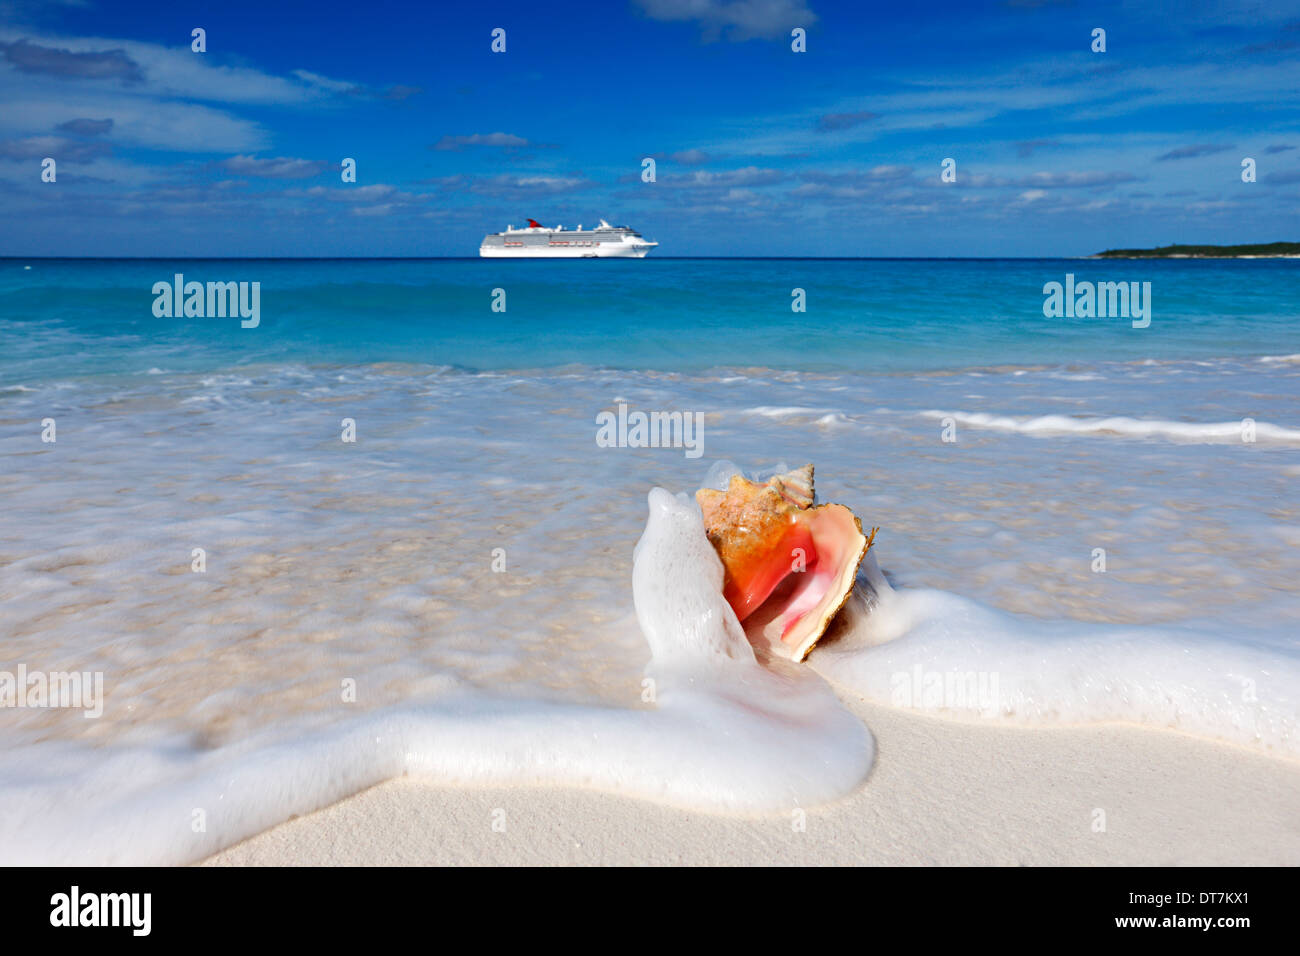 Sea water splash queen conch shell on the sand beach and cruise line ship on the horizon. Stock Photo